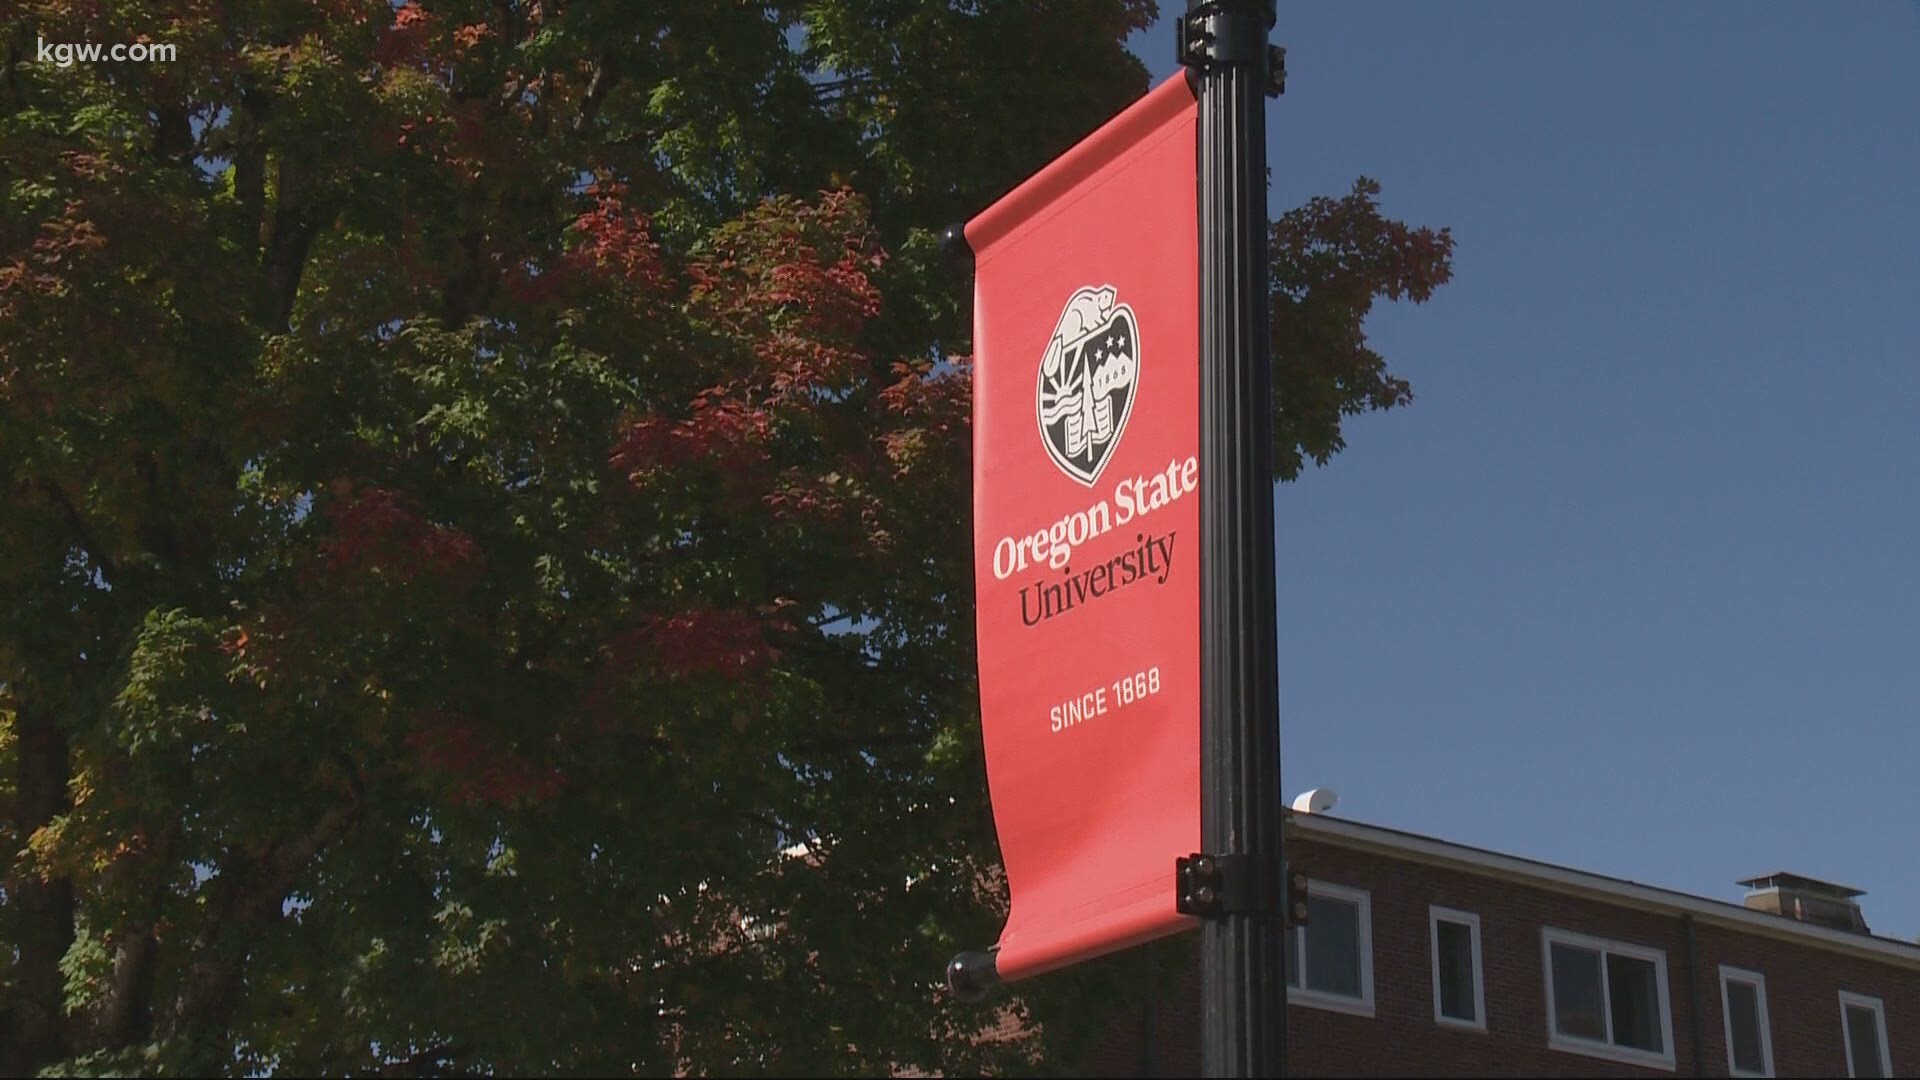 Students at Oregon State University say they are frustrated with the fall term grading policy. Christine Pitawanich spoke to students and OSU officials.